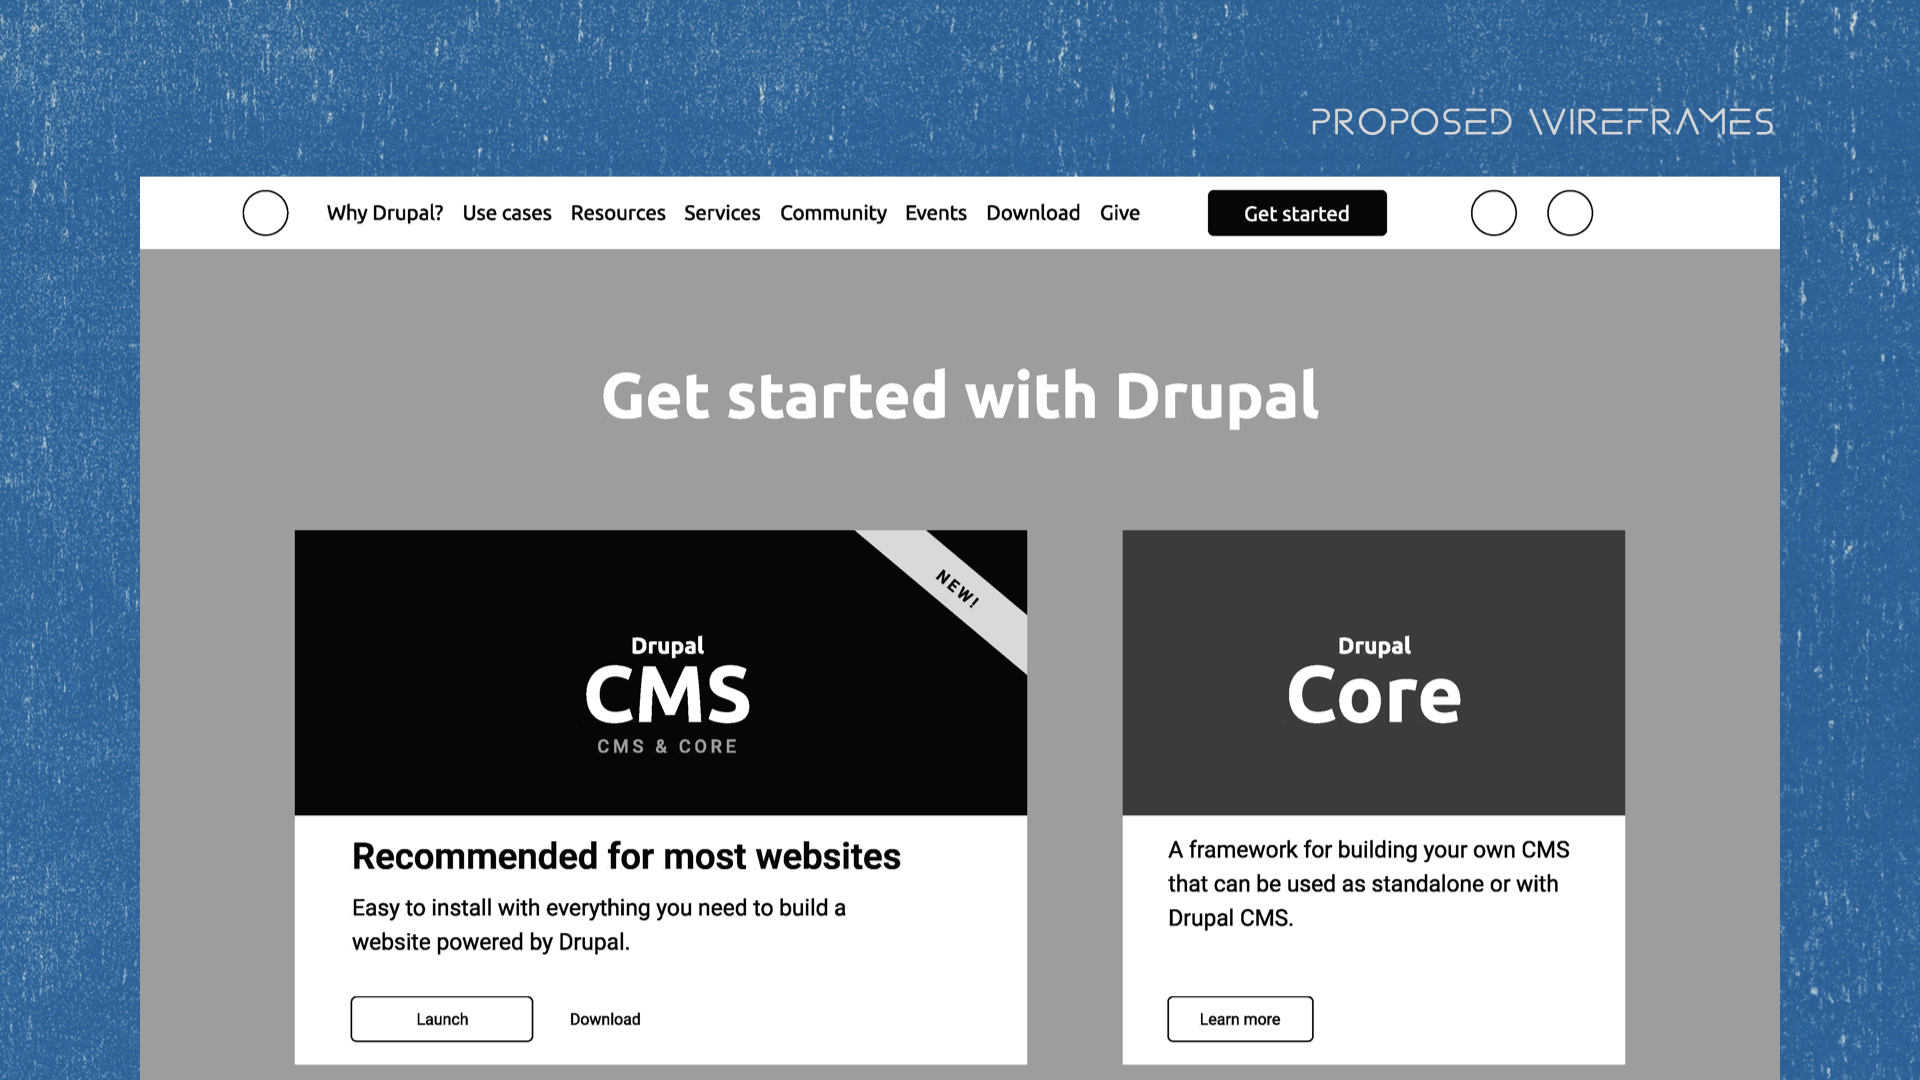 Wireframe for Drupal download page displaying two options